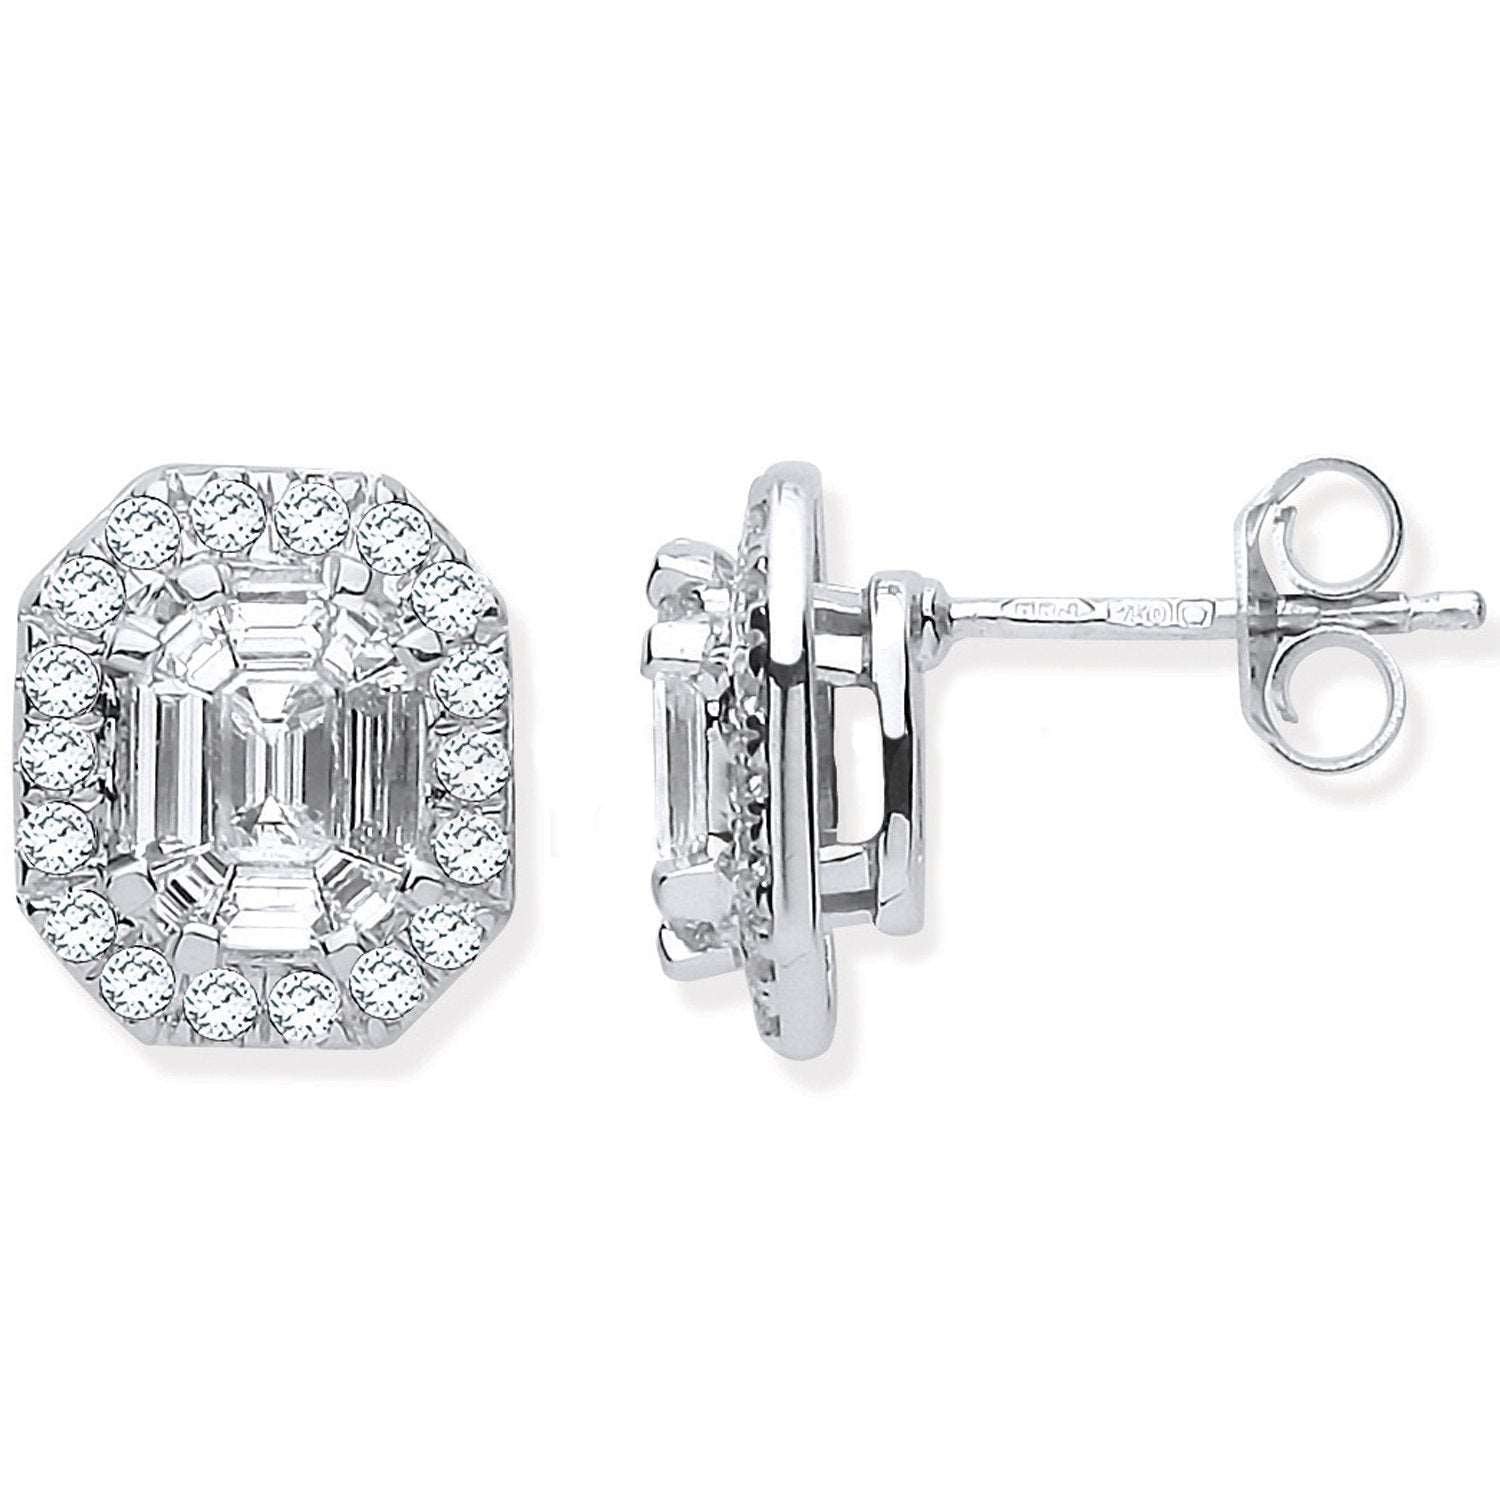 18ct White Gold Round Baguettes & Emerald Centre 1.40ct Diamond Stud Earrings